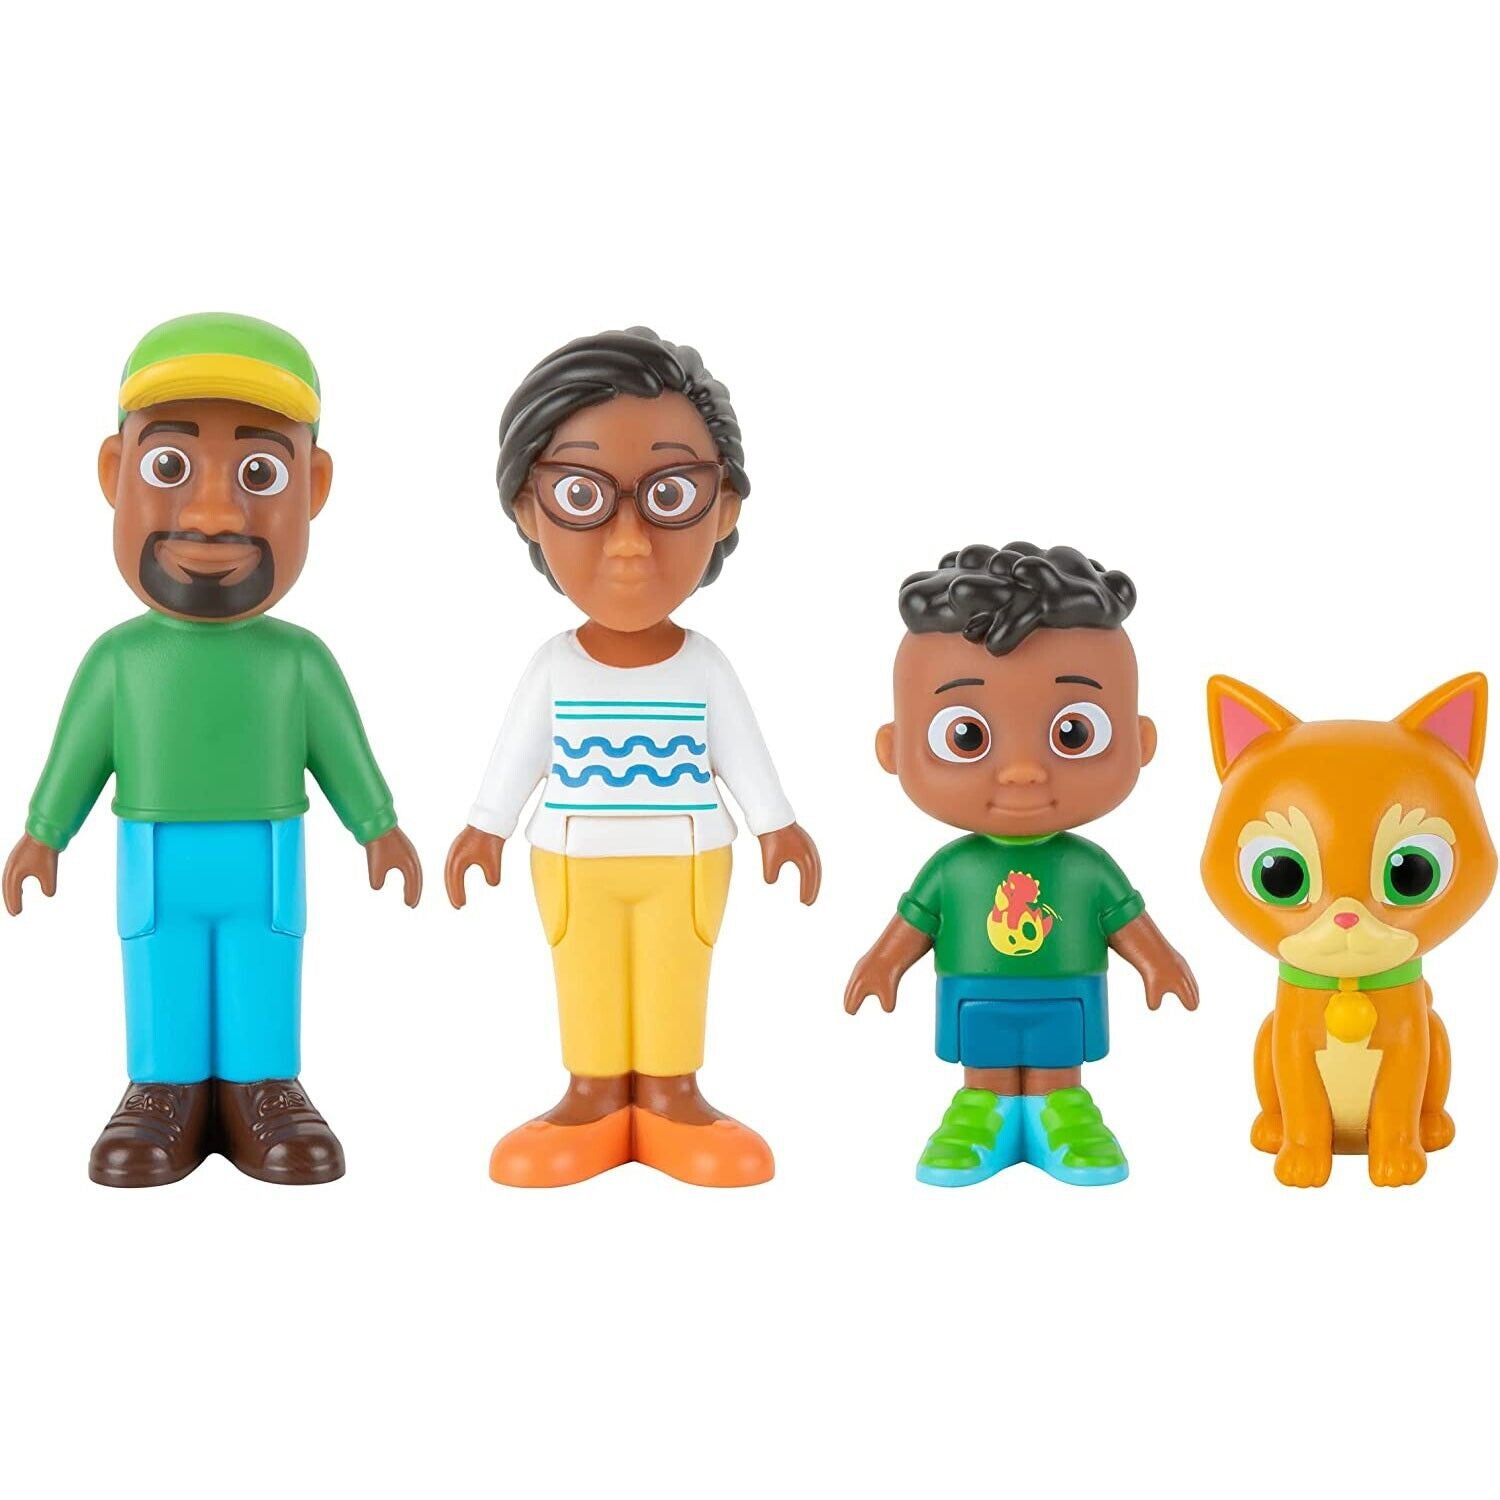 New CoComelon Cody's Family 4-Figure Pack - Fun Toy Set for Kids